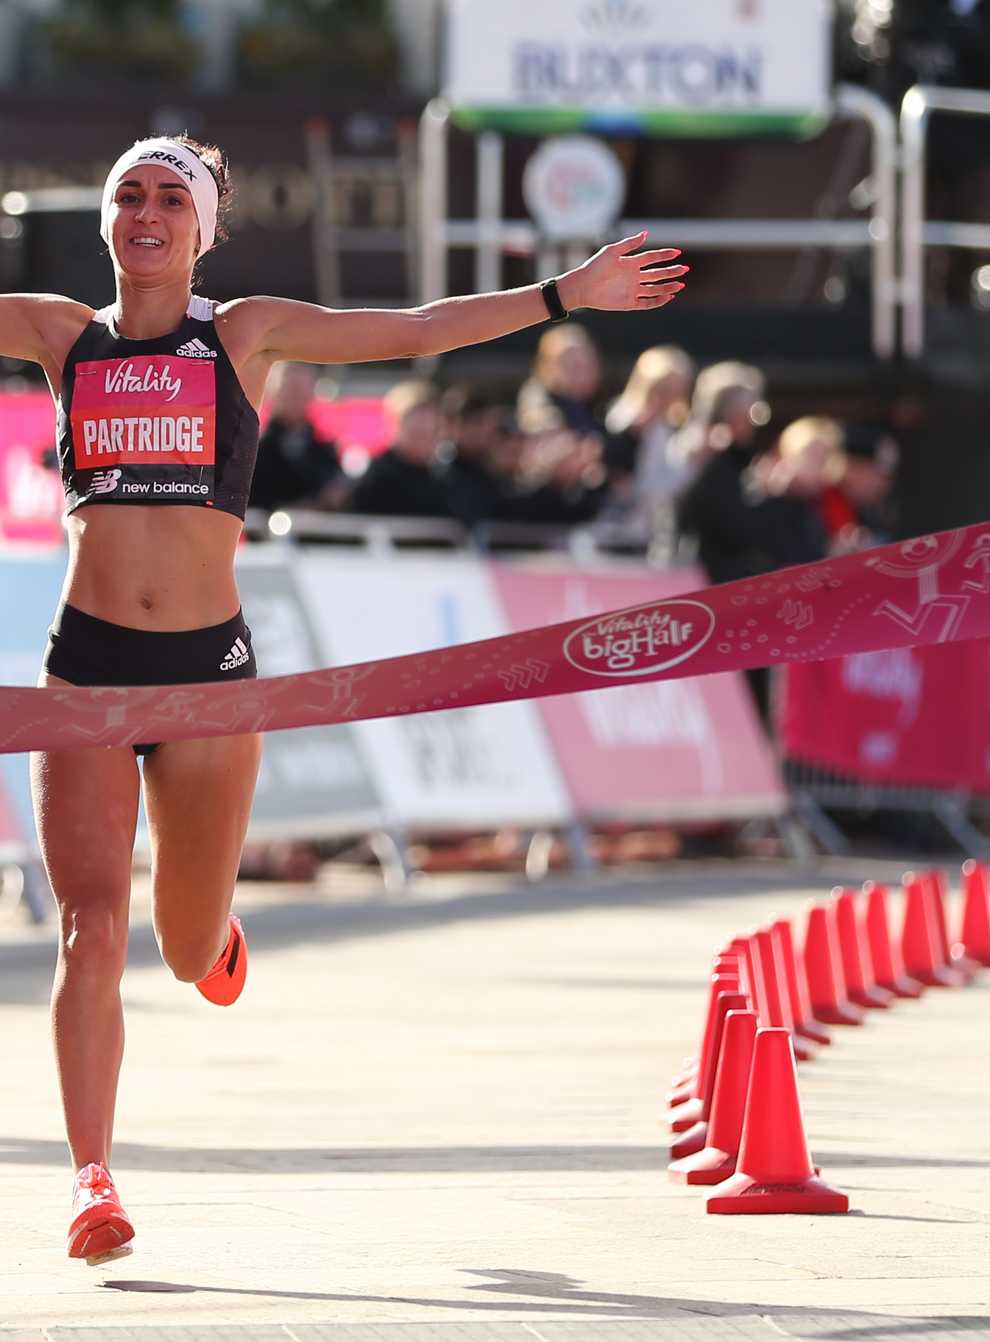 Lily Partridge says cutting coverage of long-distance events will damage the sport